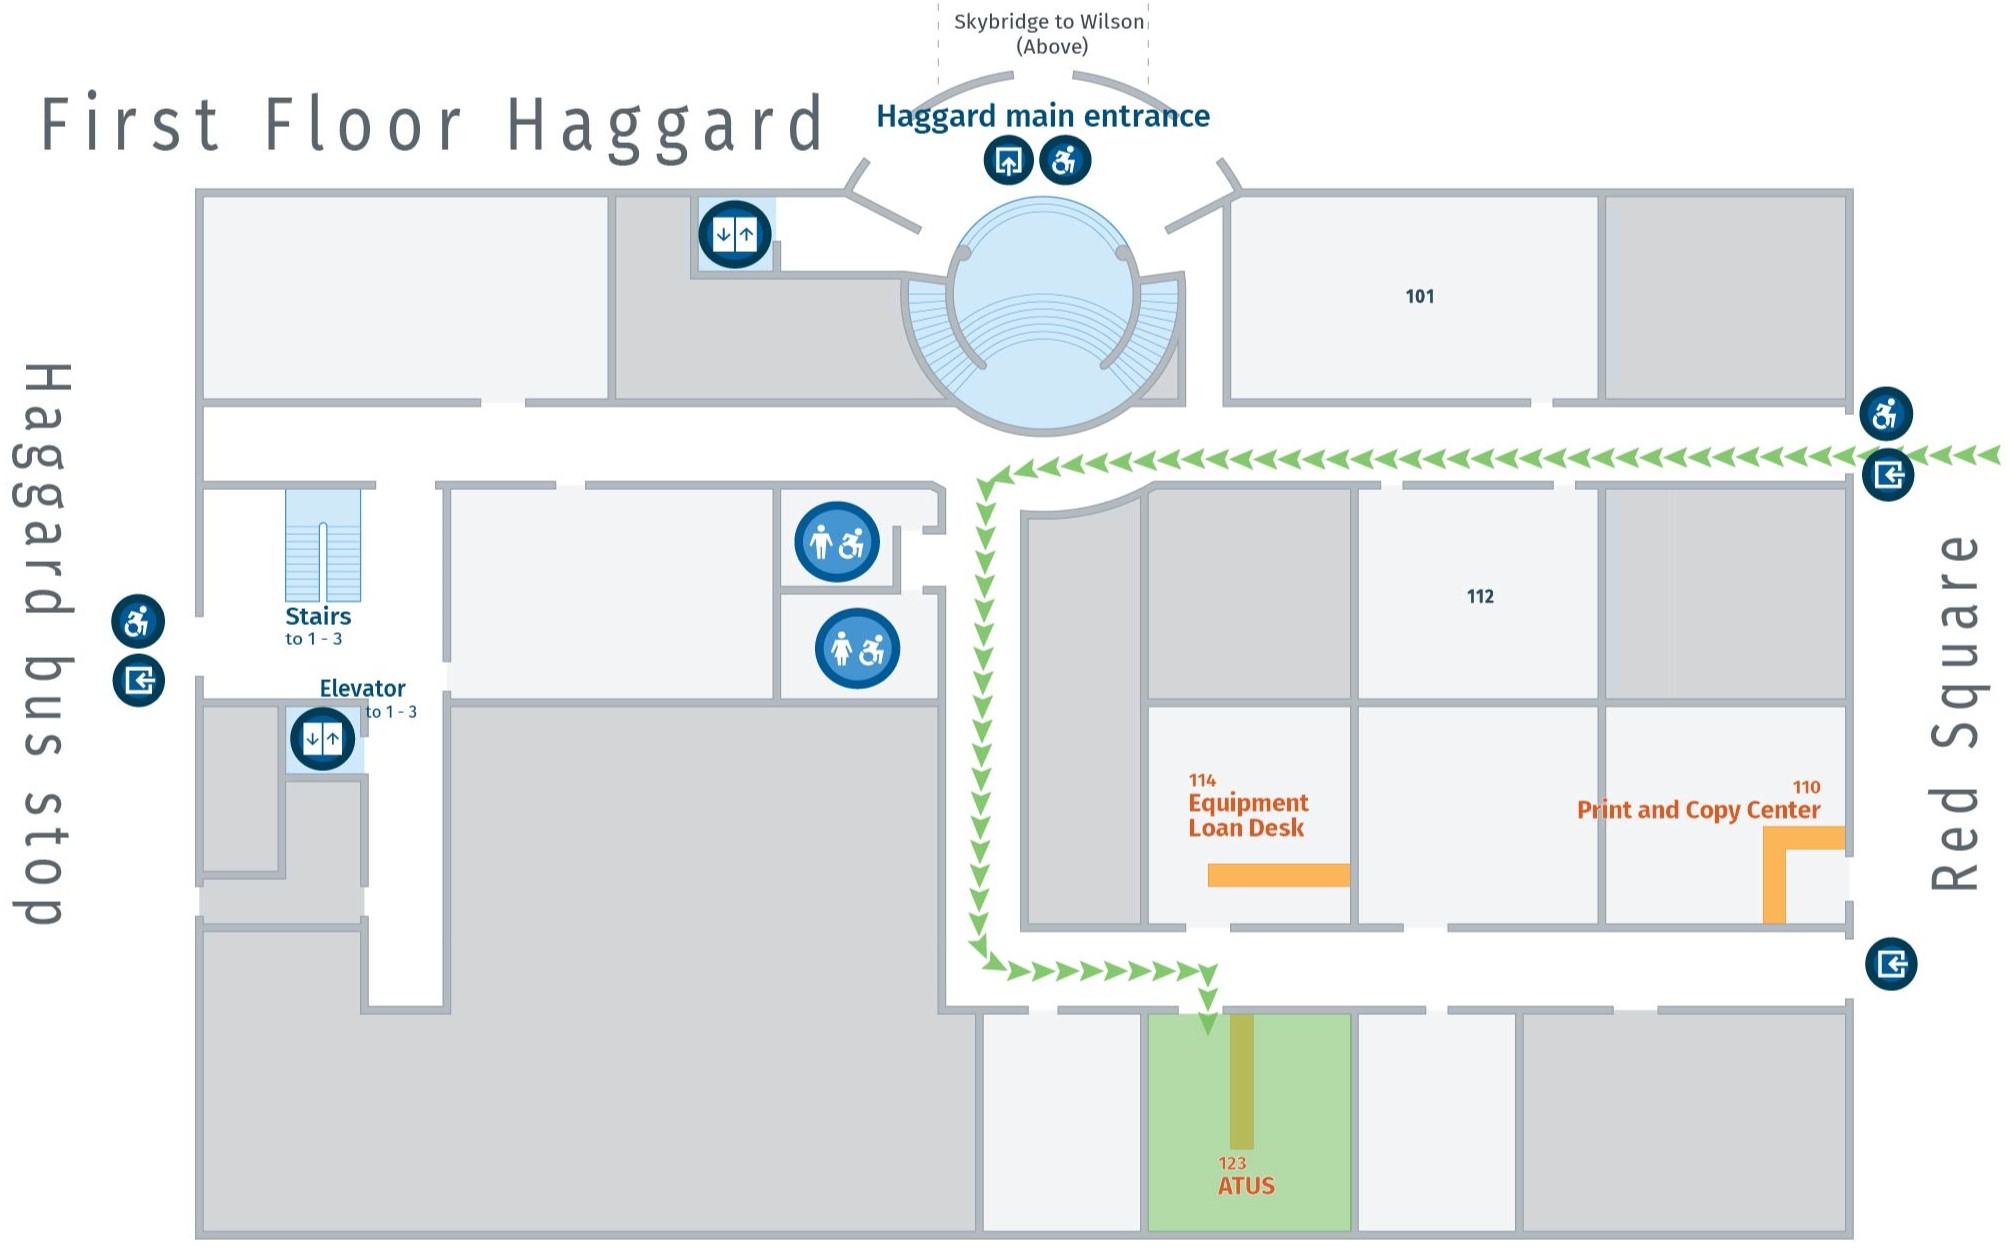 Floor plan, first floor of Haggard with accessible path to ATUS.